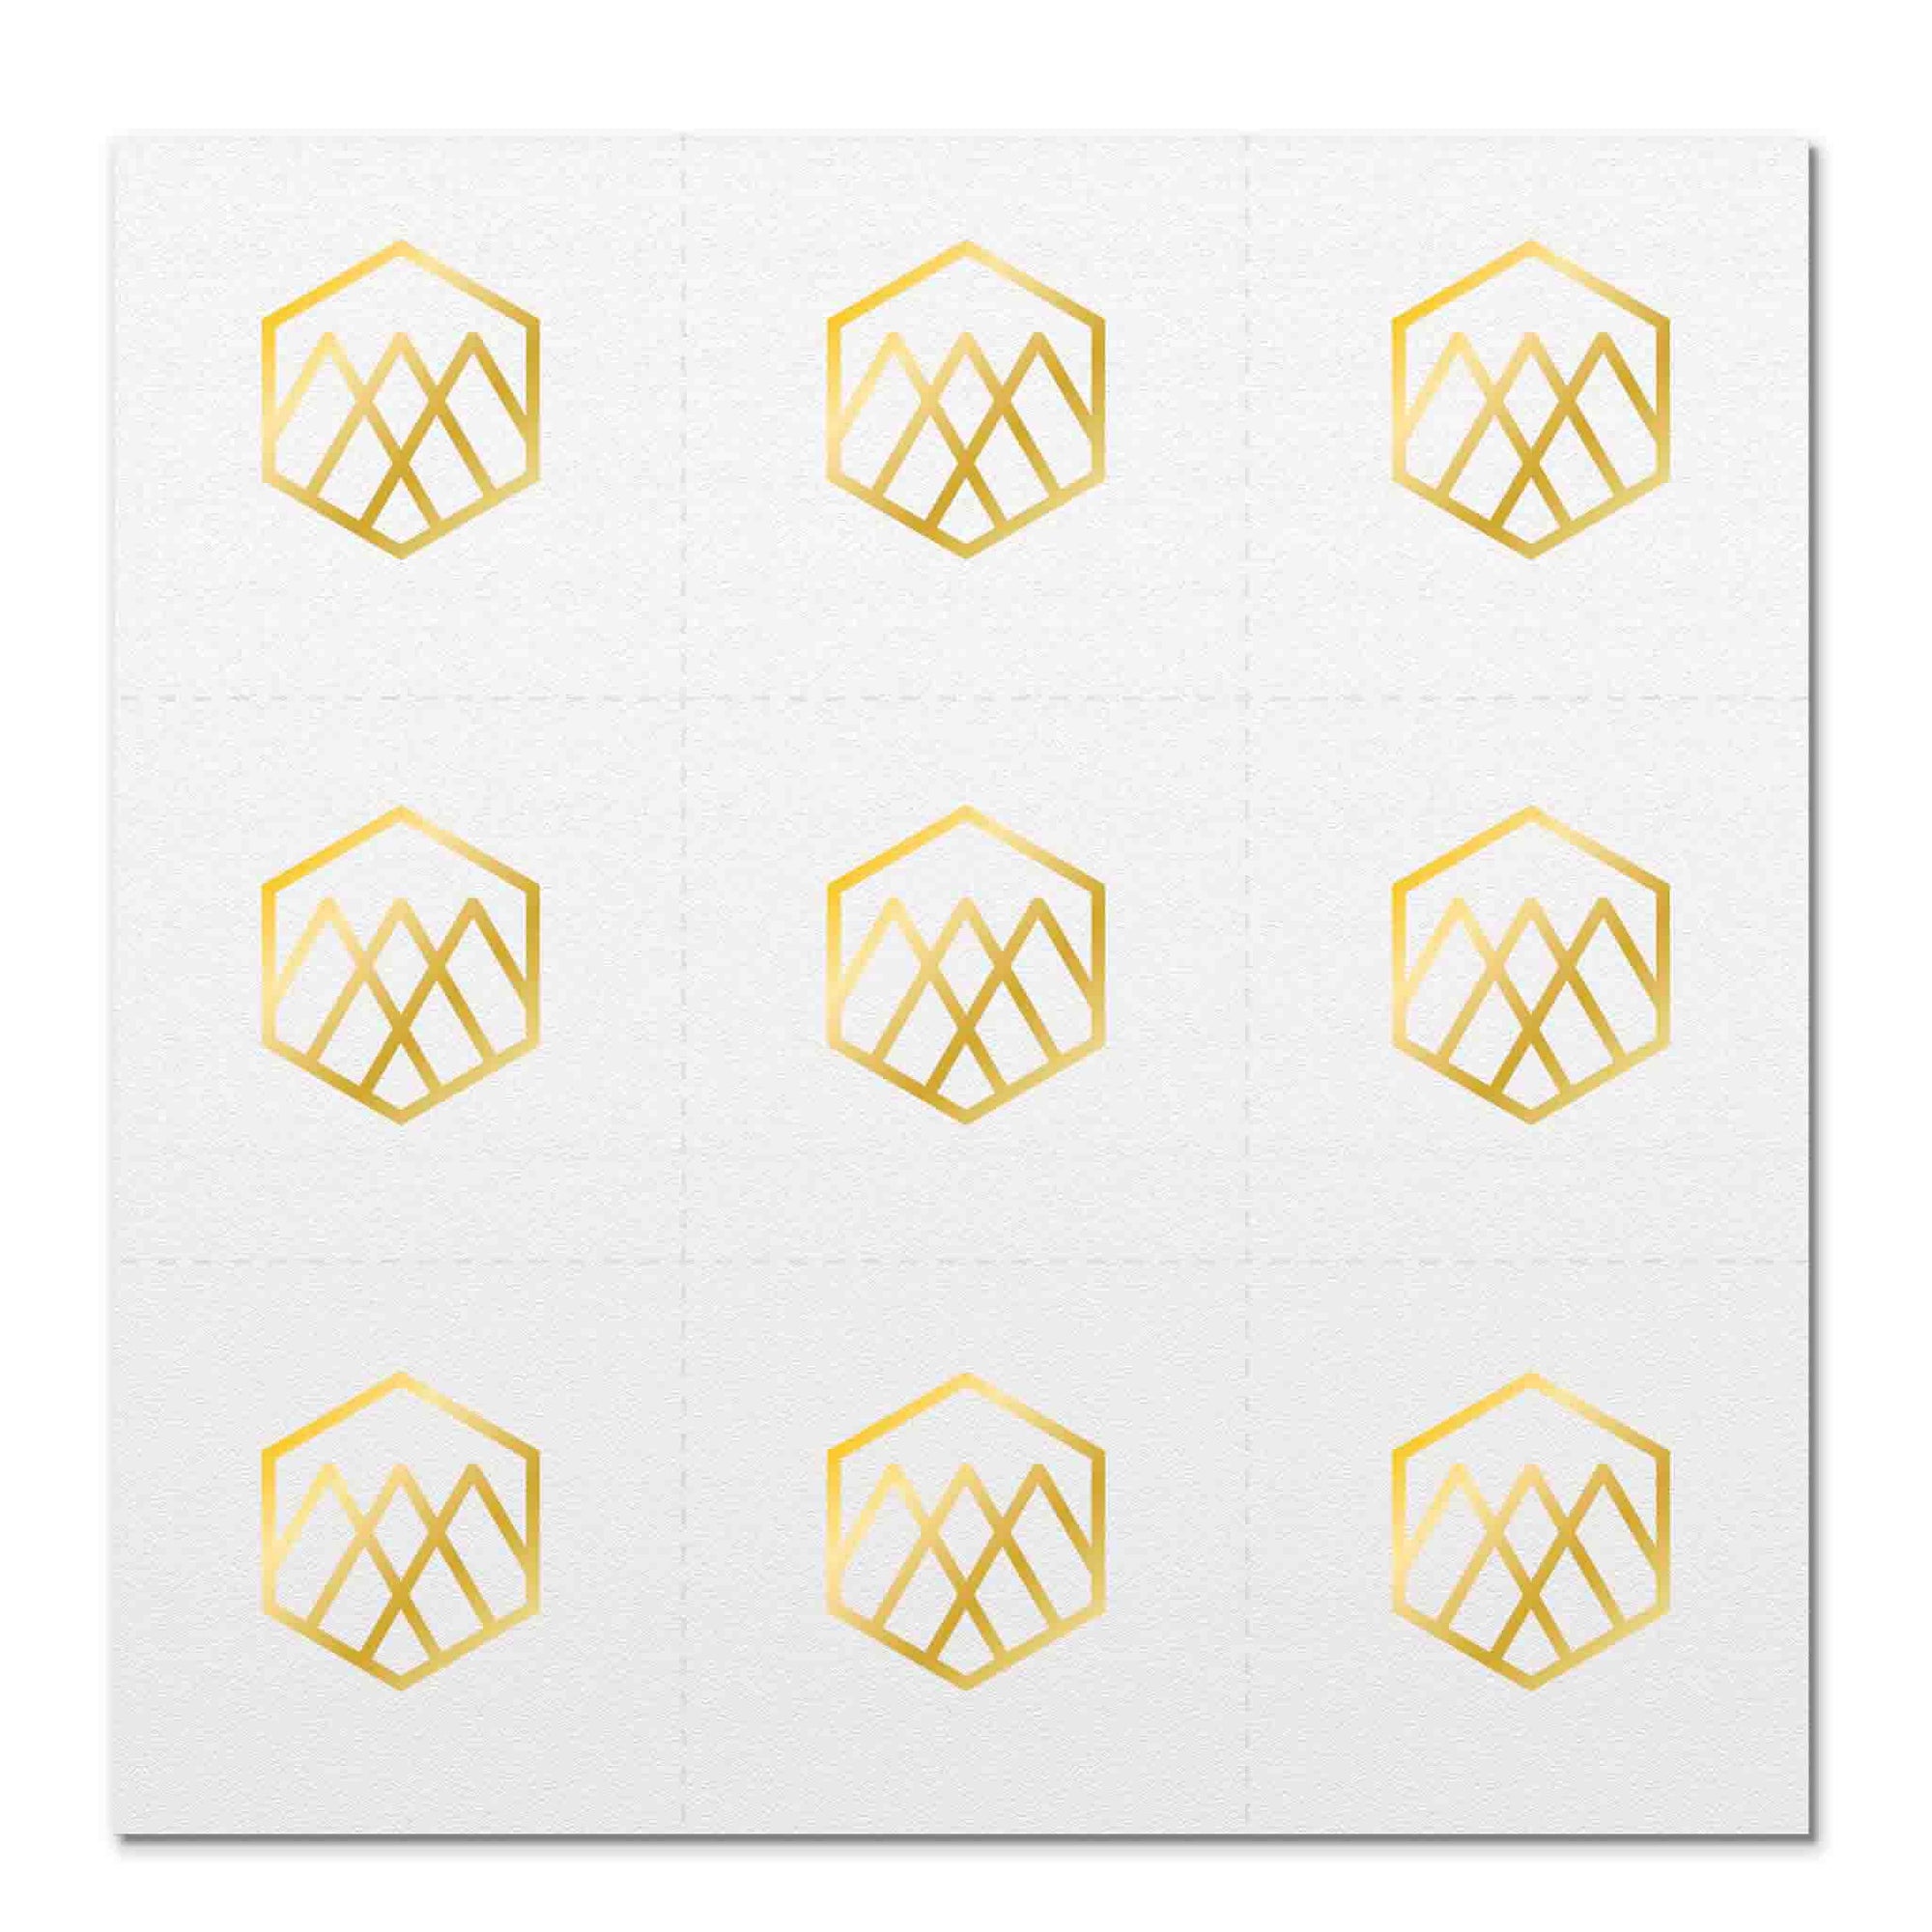 Front side page of Breathe (gold) mindful marks temporary mindfulness tattoo wearable reminders.